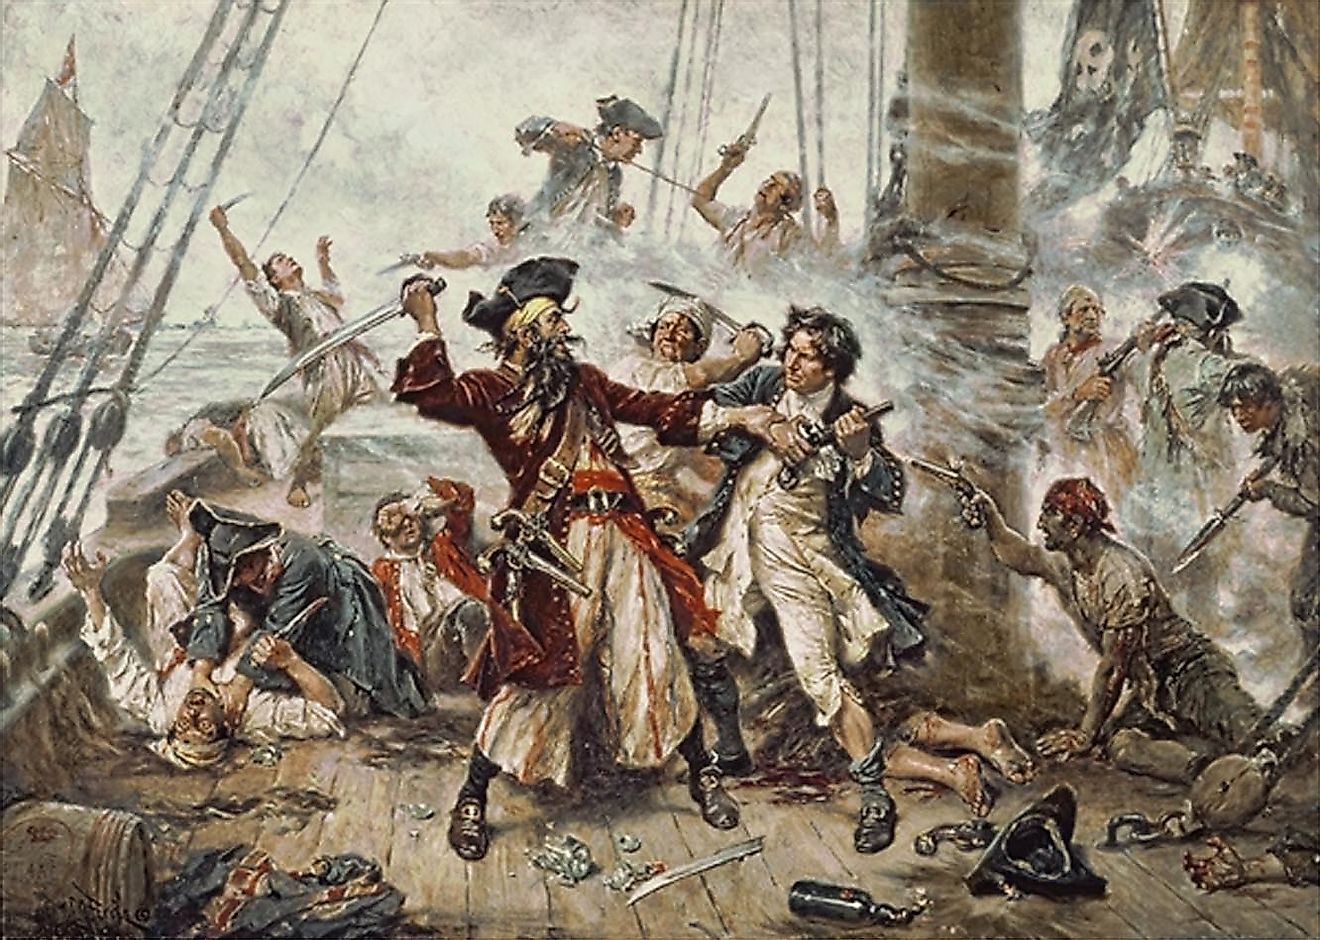 More details Capture of the Pirate, Blackbeard, 1718, Jean Leon Gerome Ferris, painted in 1920. Image credit: Jean Leon Gerome Ferris/Public domain